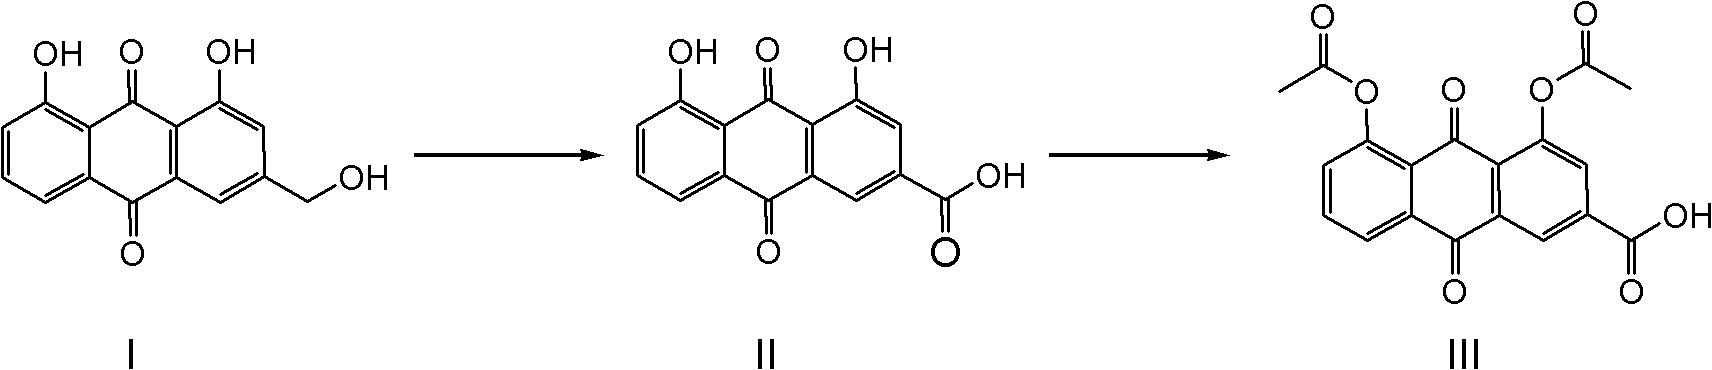 Synthetic process for diacerein